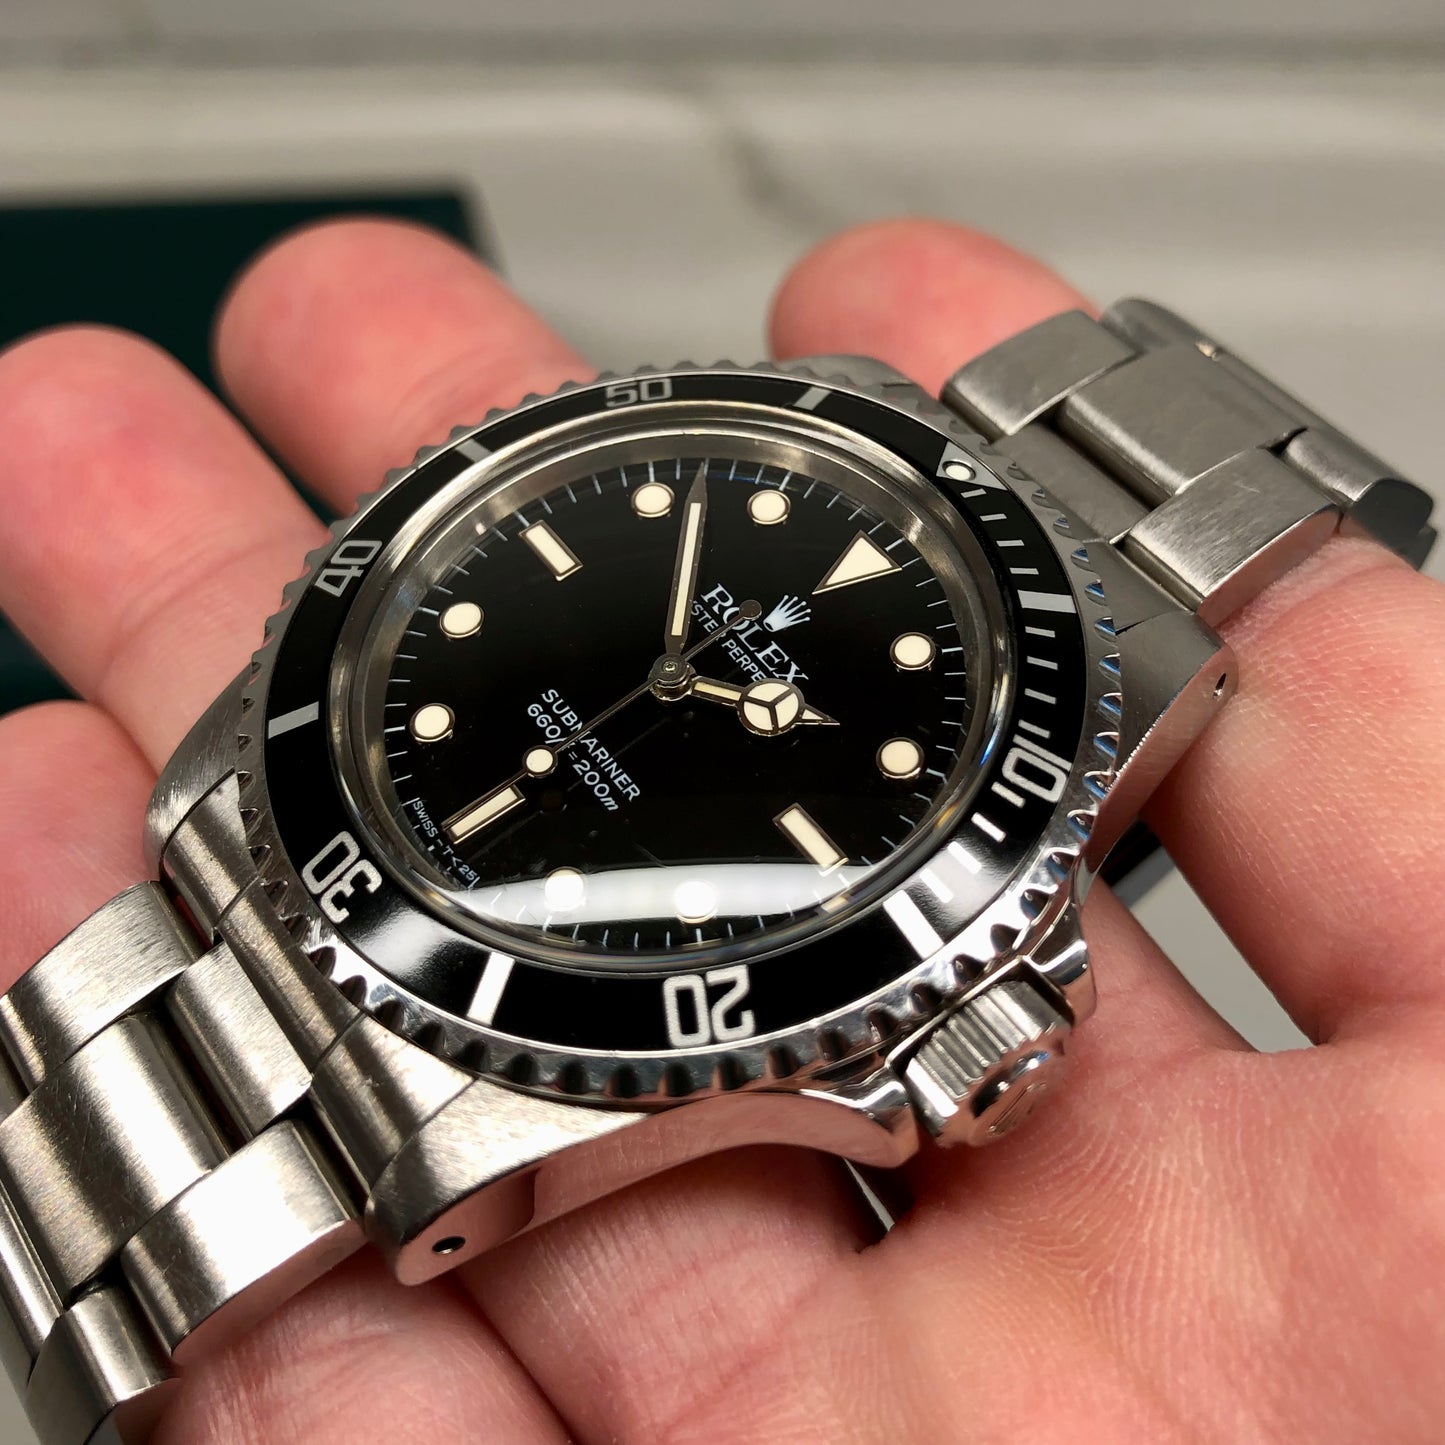 1985 Rolex Submariner 5513 No Date Steel Oyster Wristwatch with Box and Tag - Hashtag Watch Company